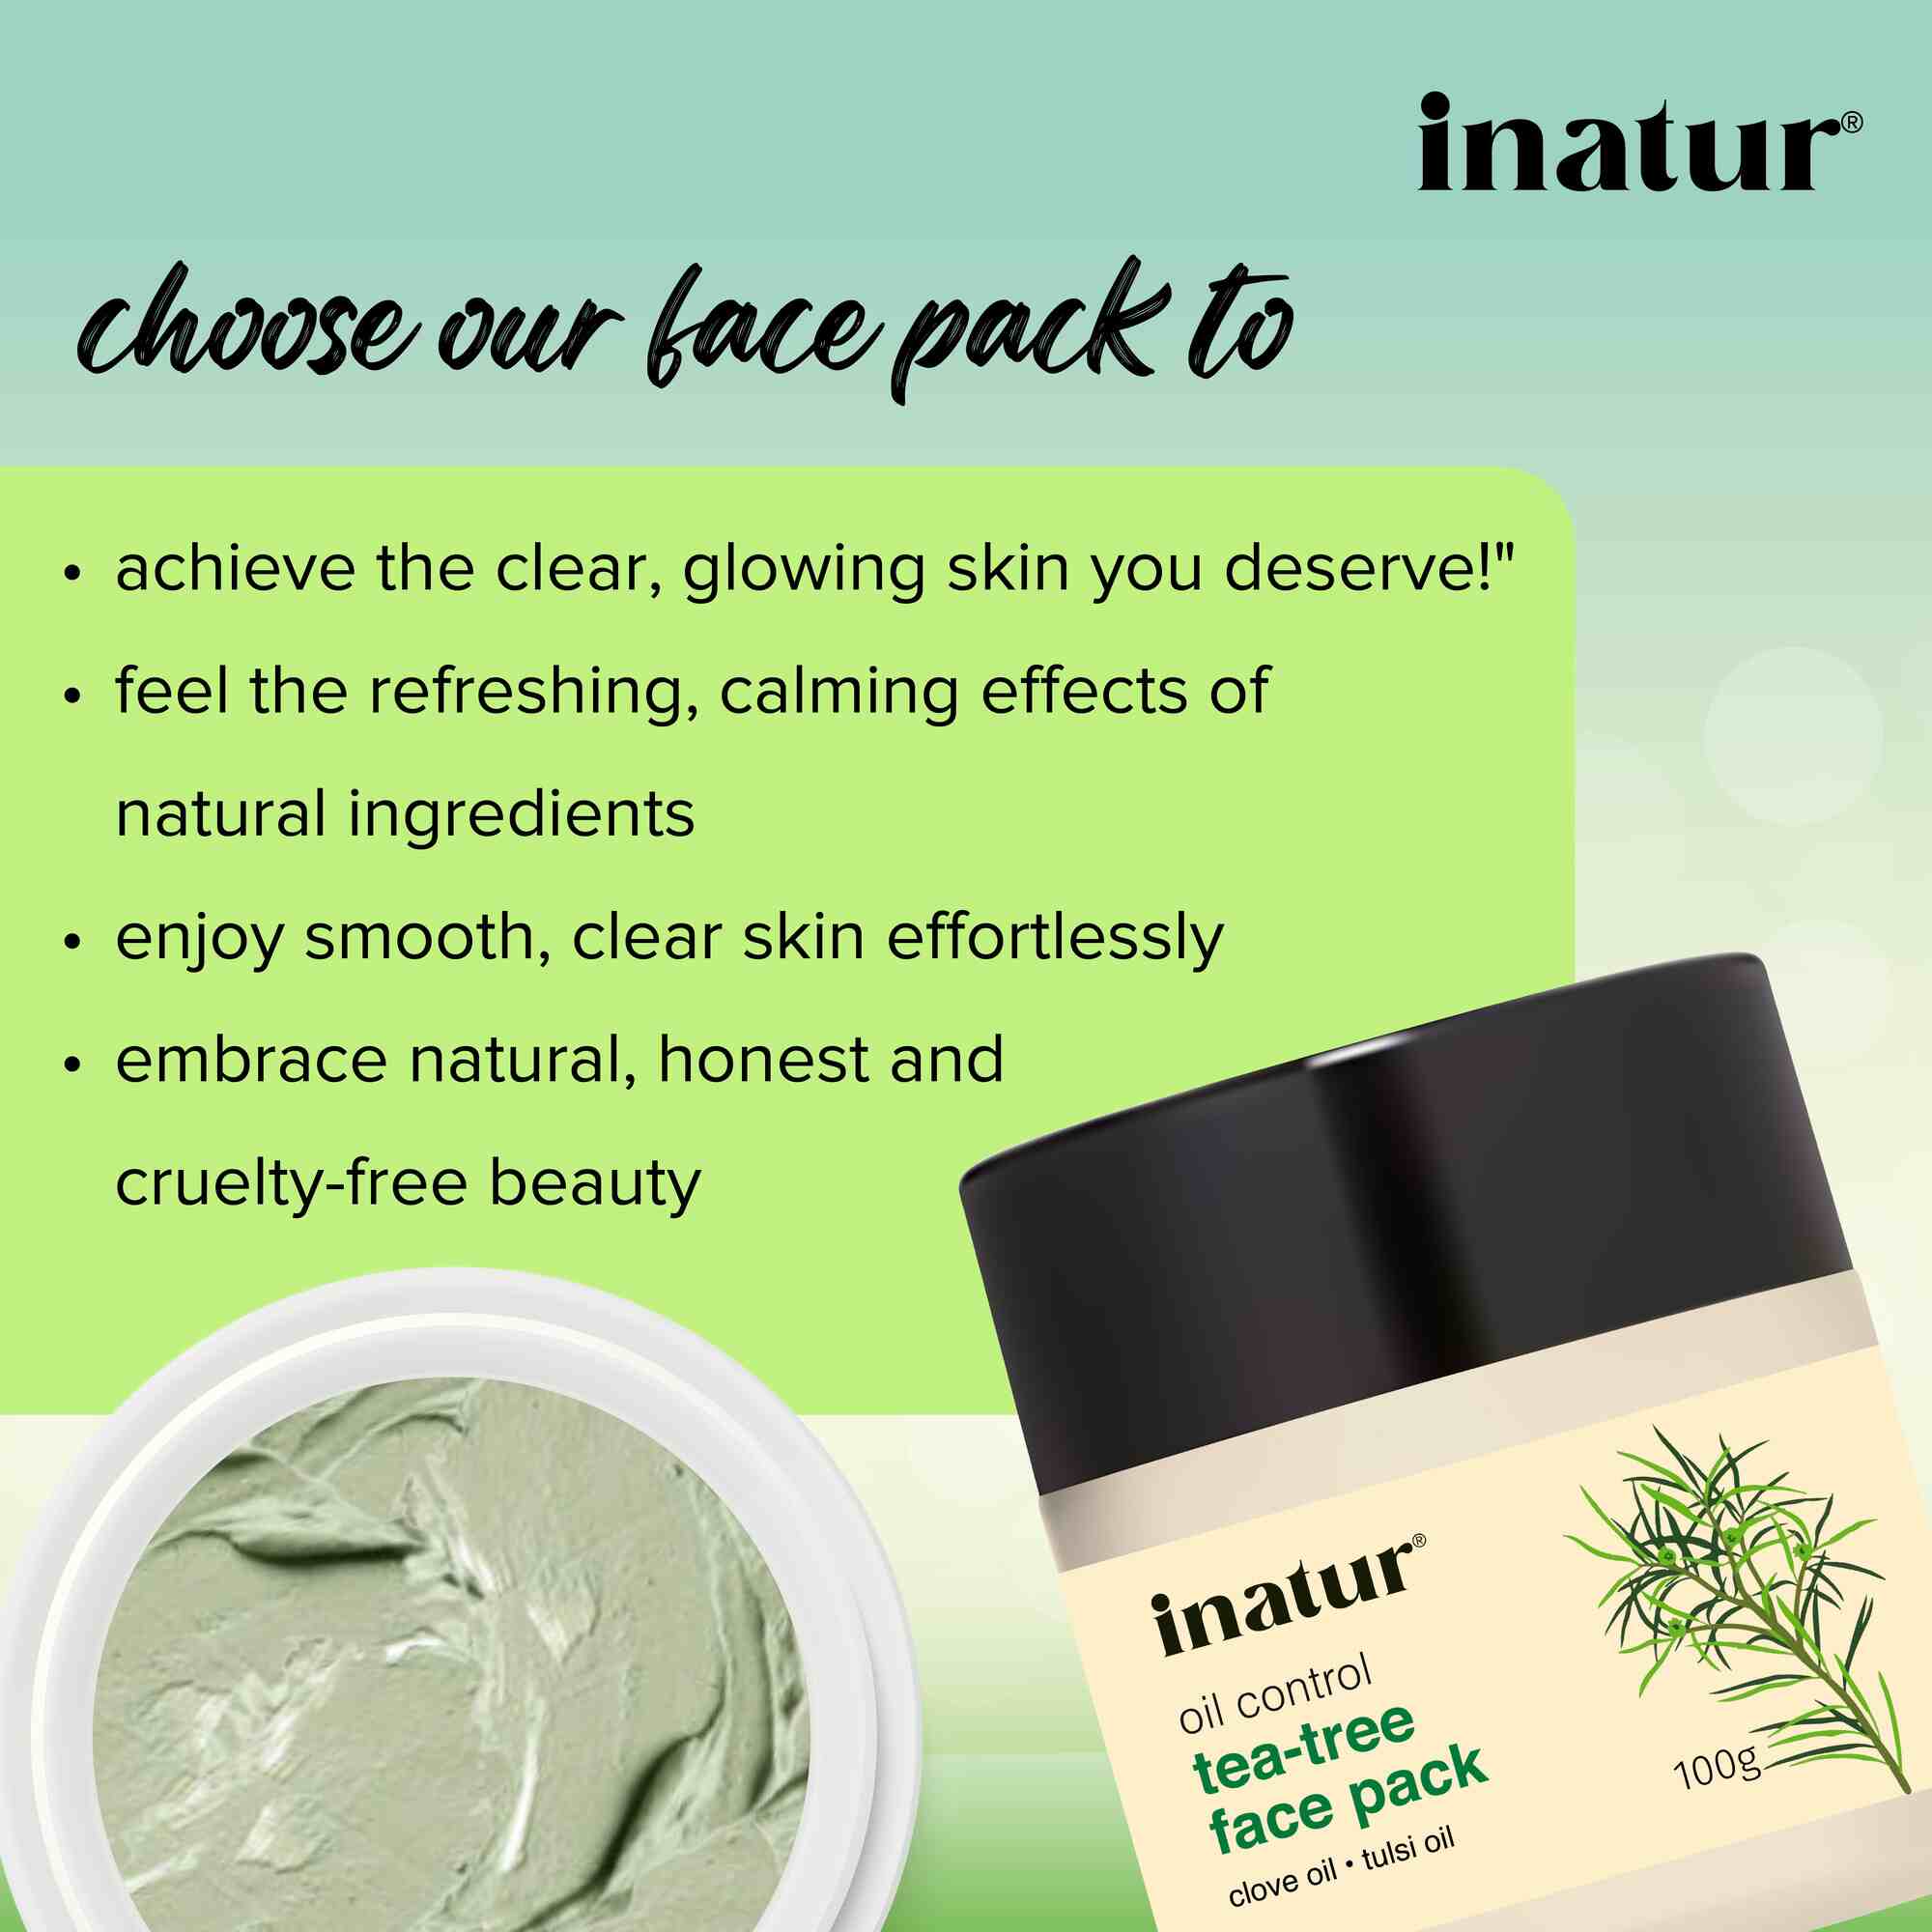 why choose inatur tea tree face pack